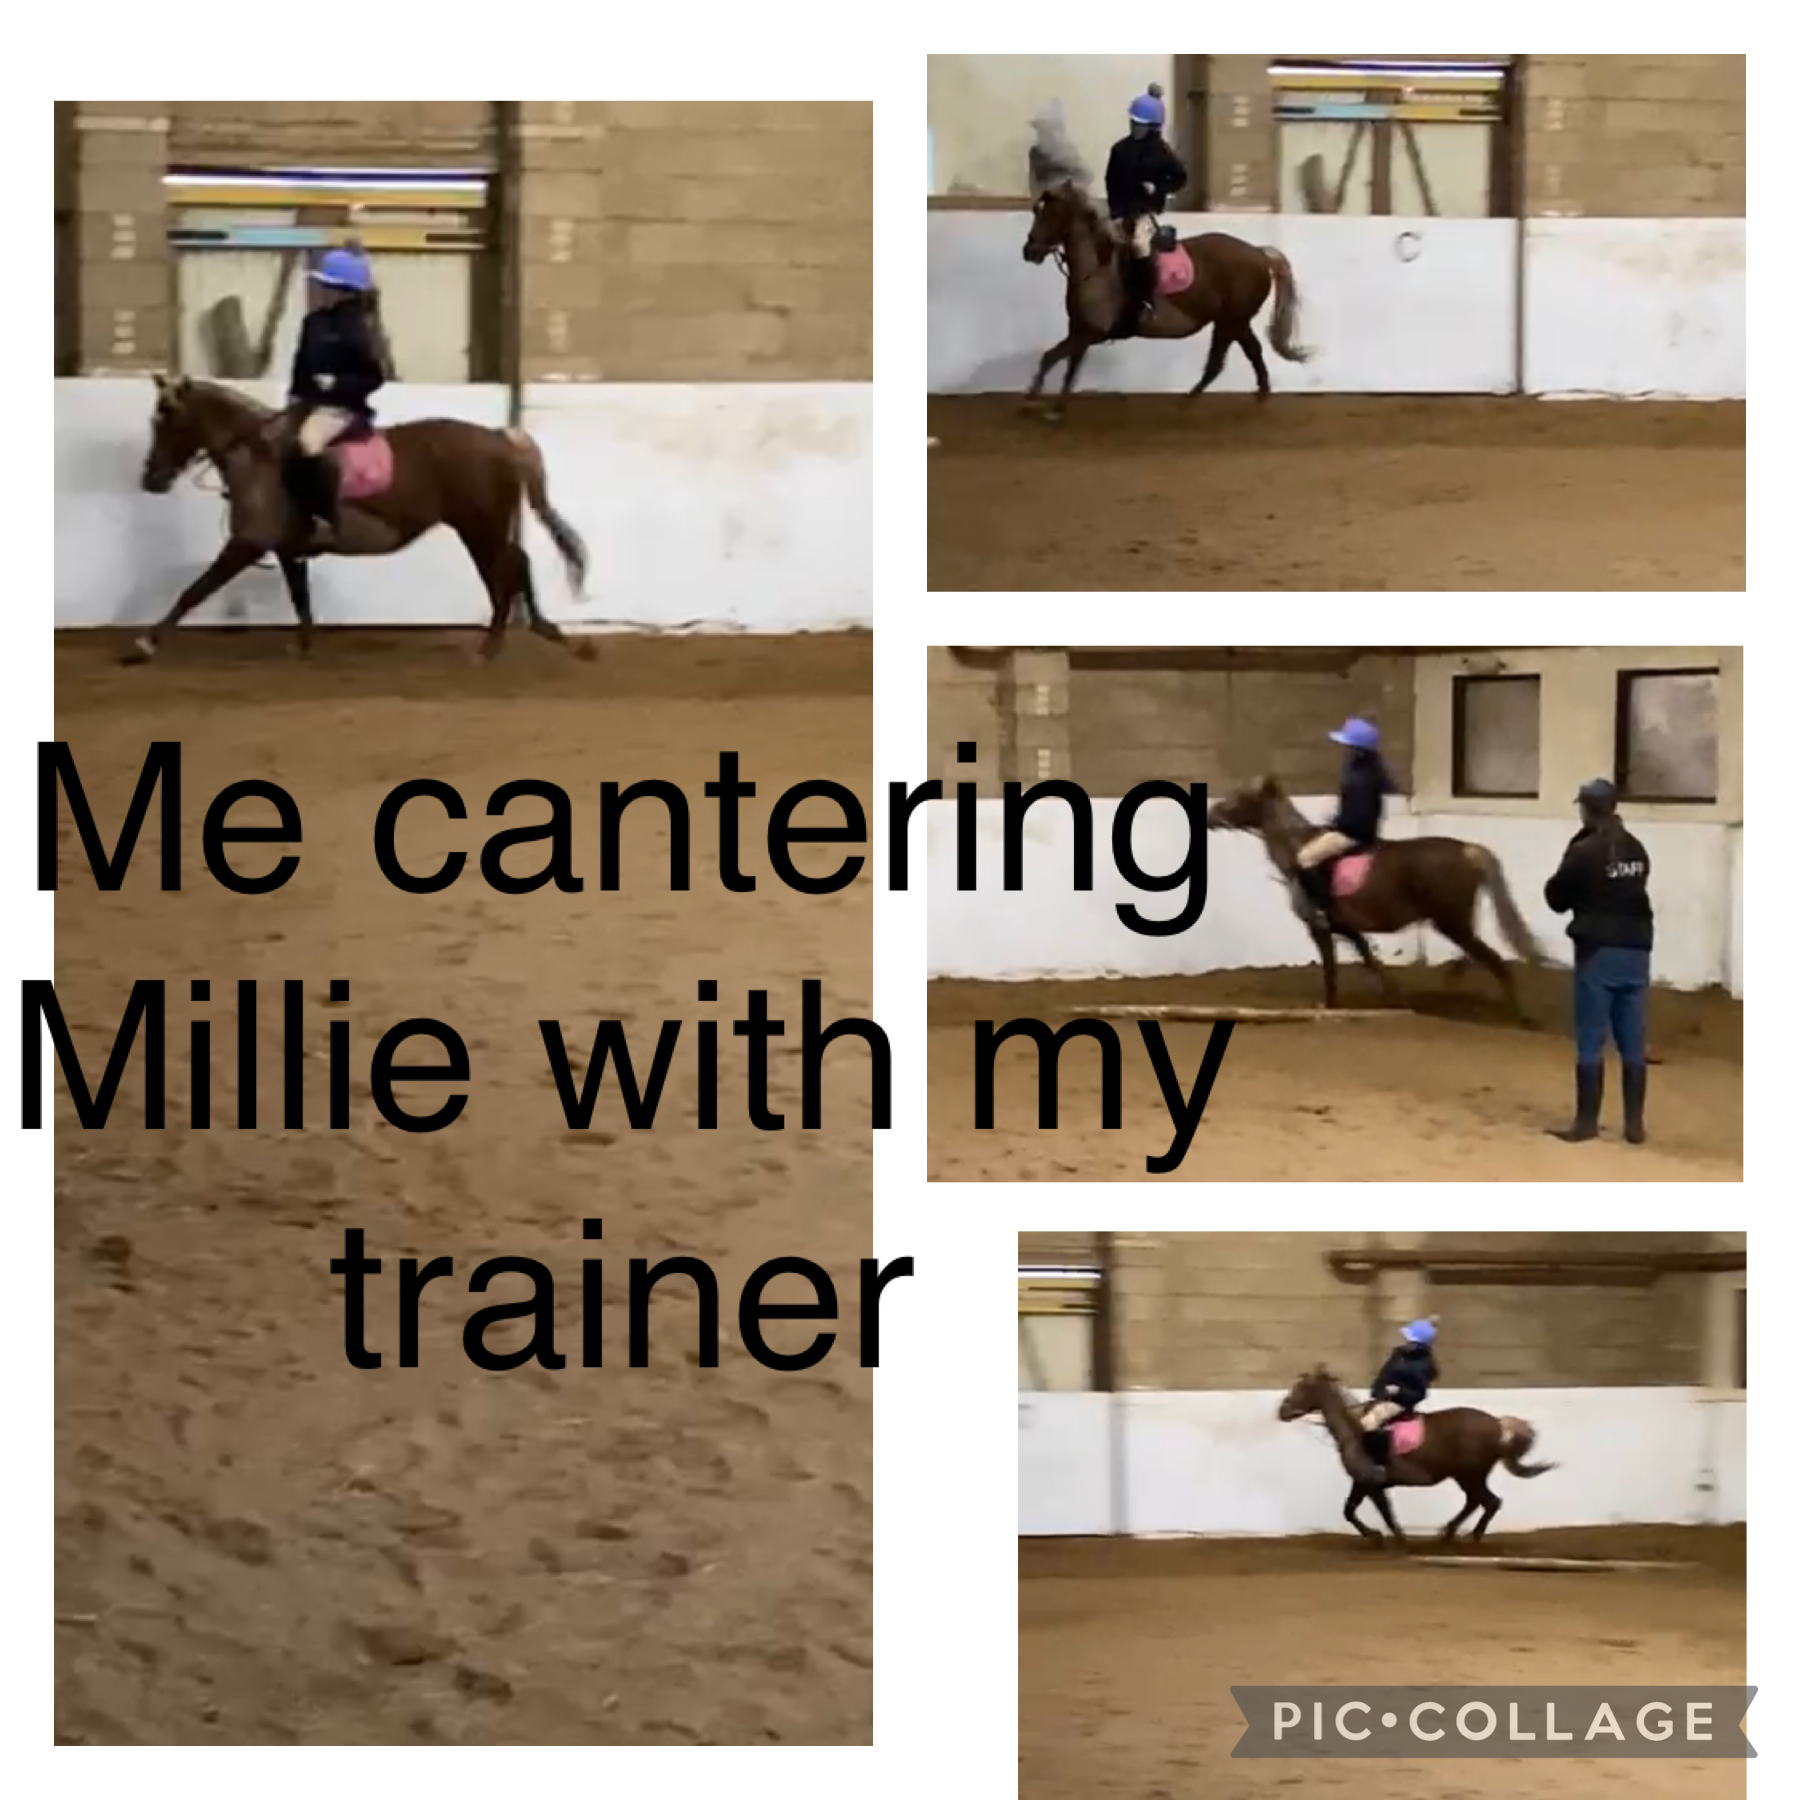 Me doing a canter on Millie which my trainer 
